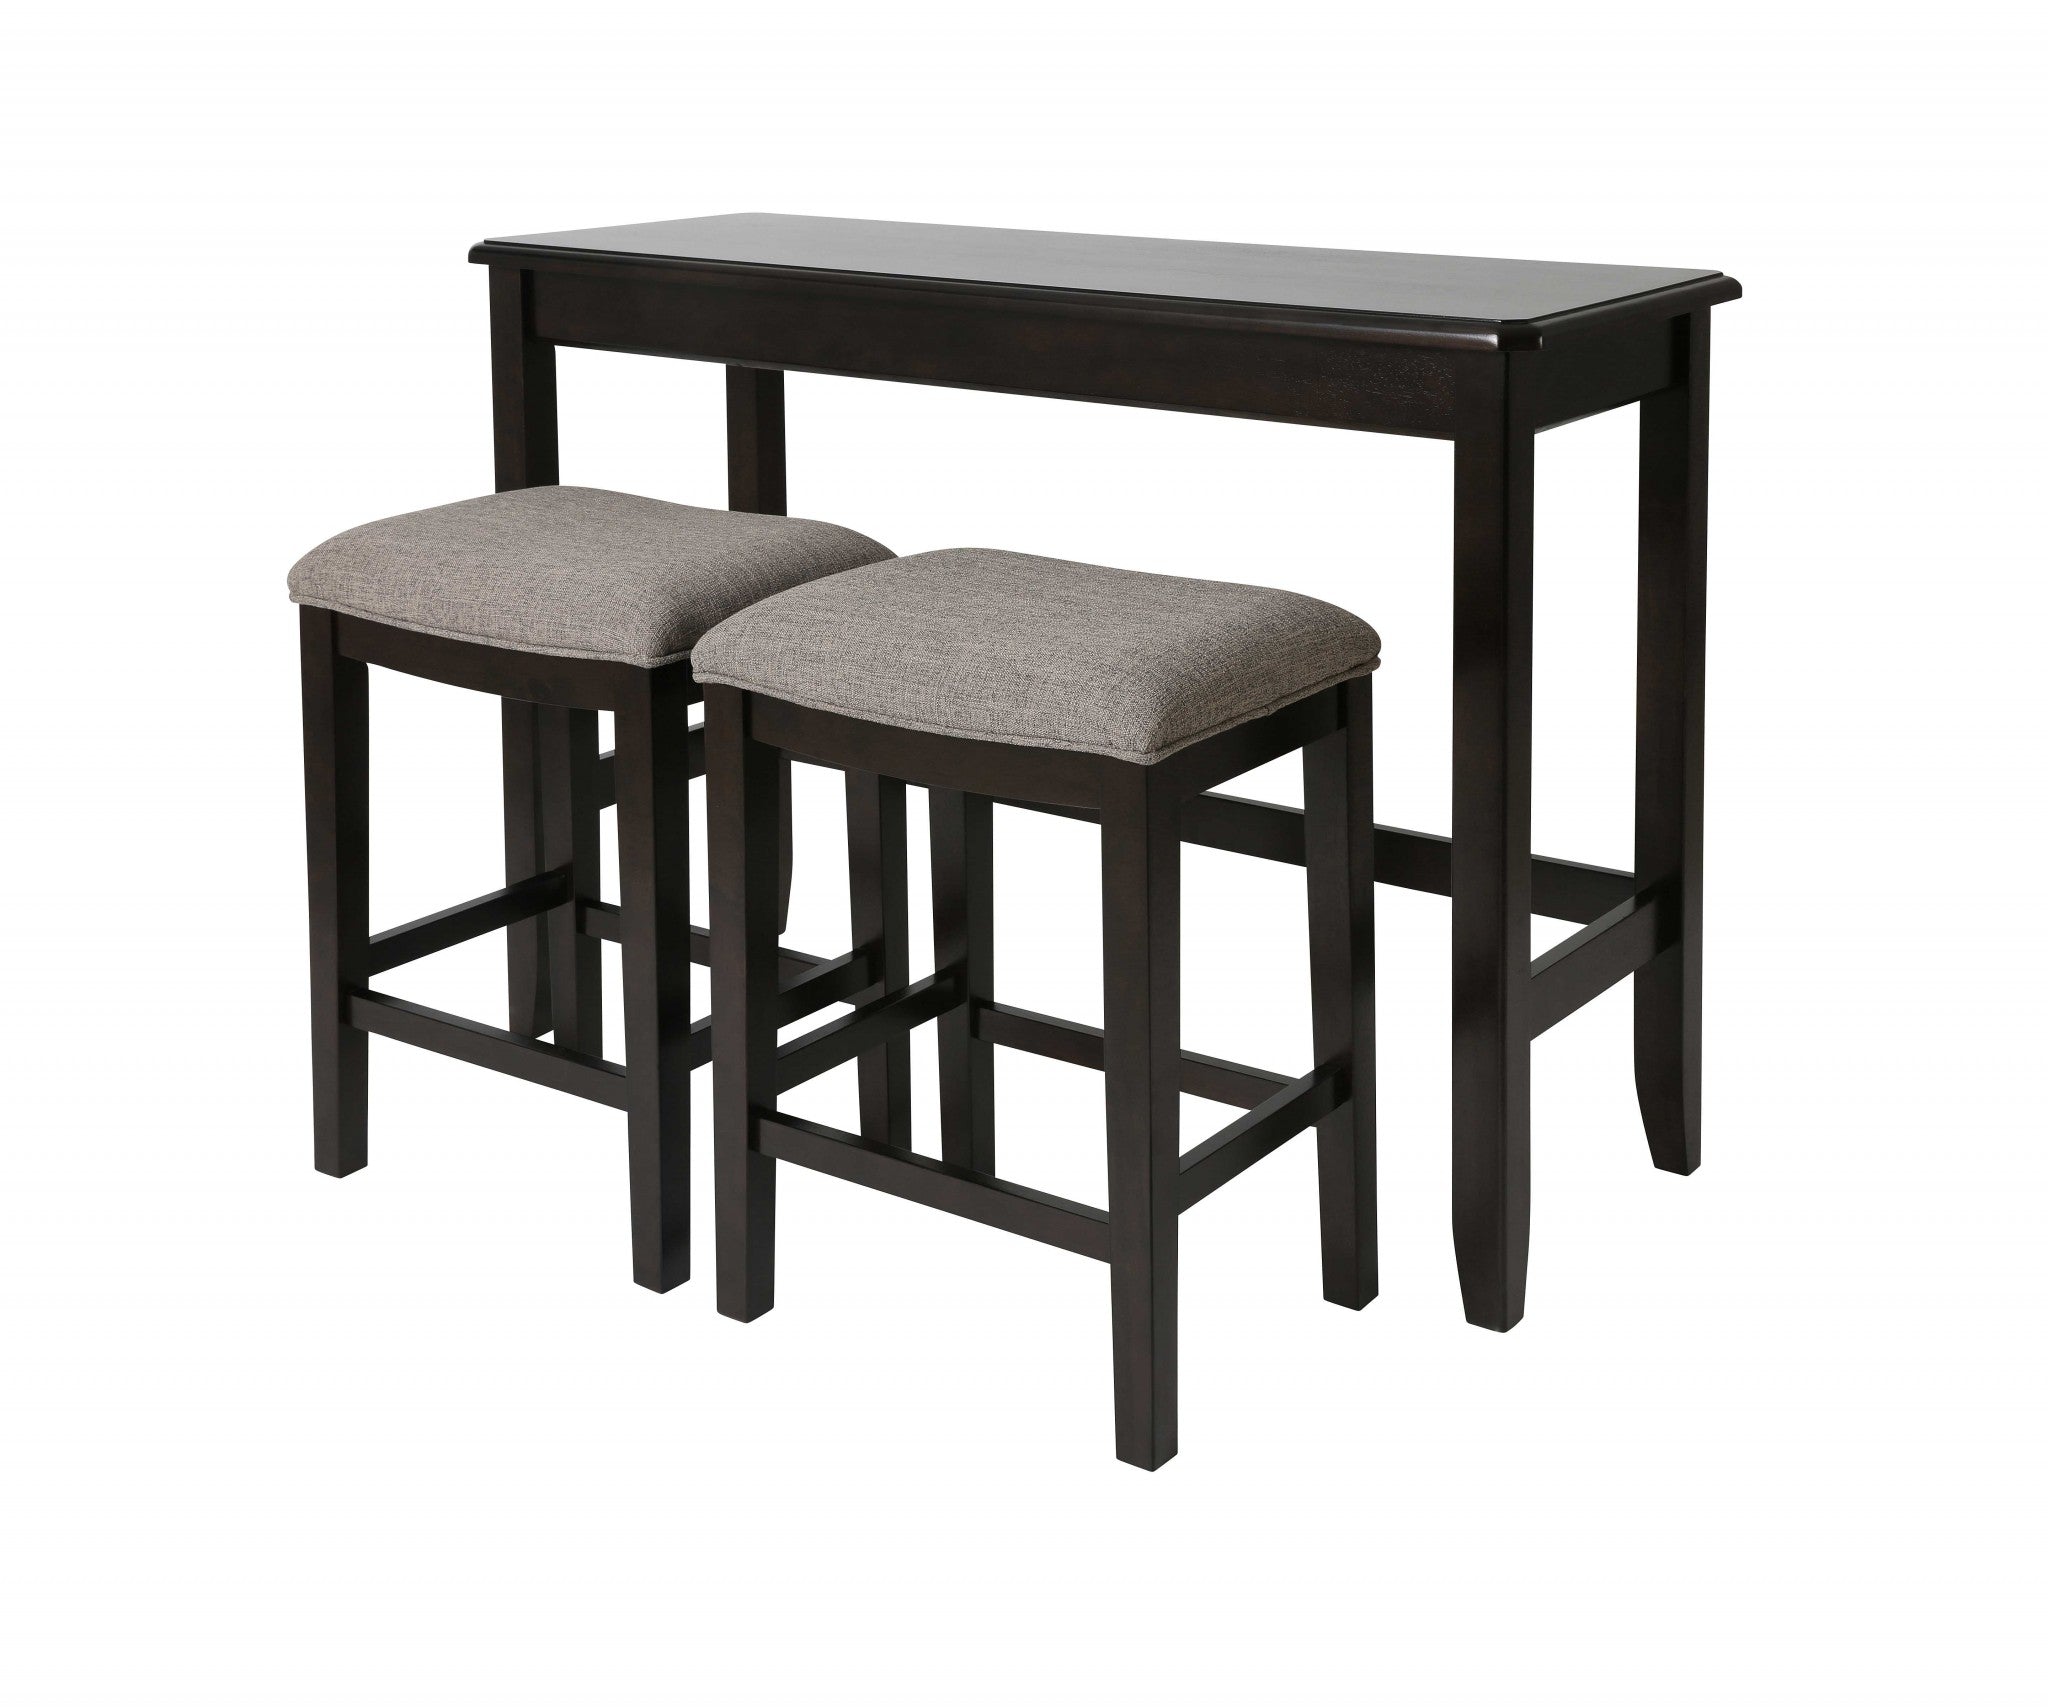 Perfecto Espresso Finish Sofa table with Two Bar Stools